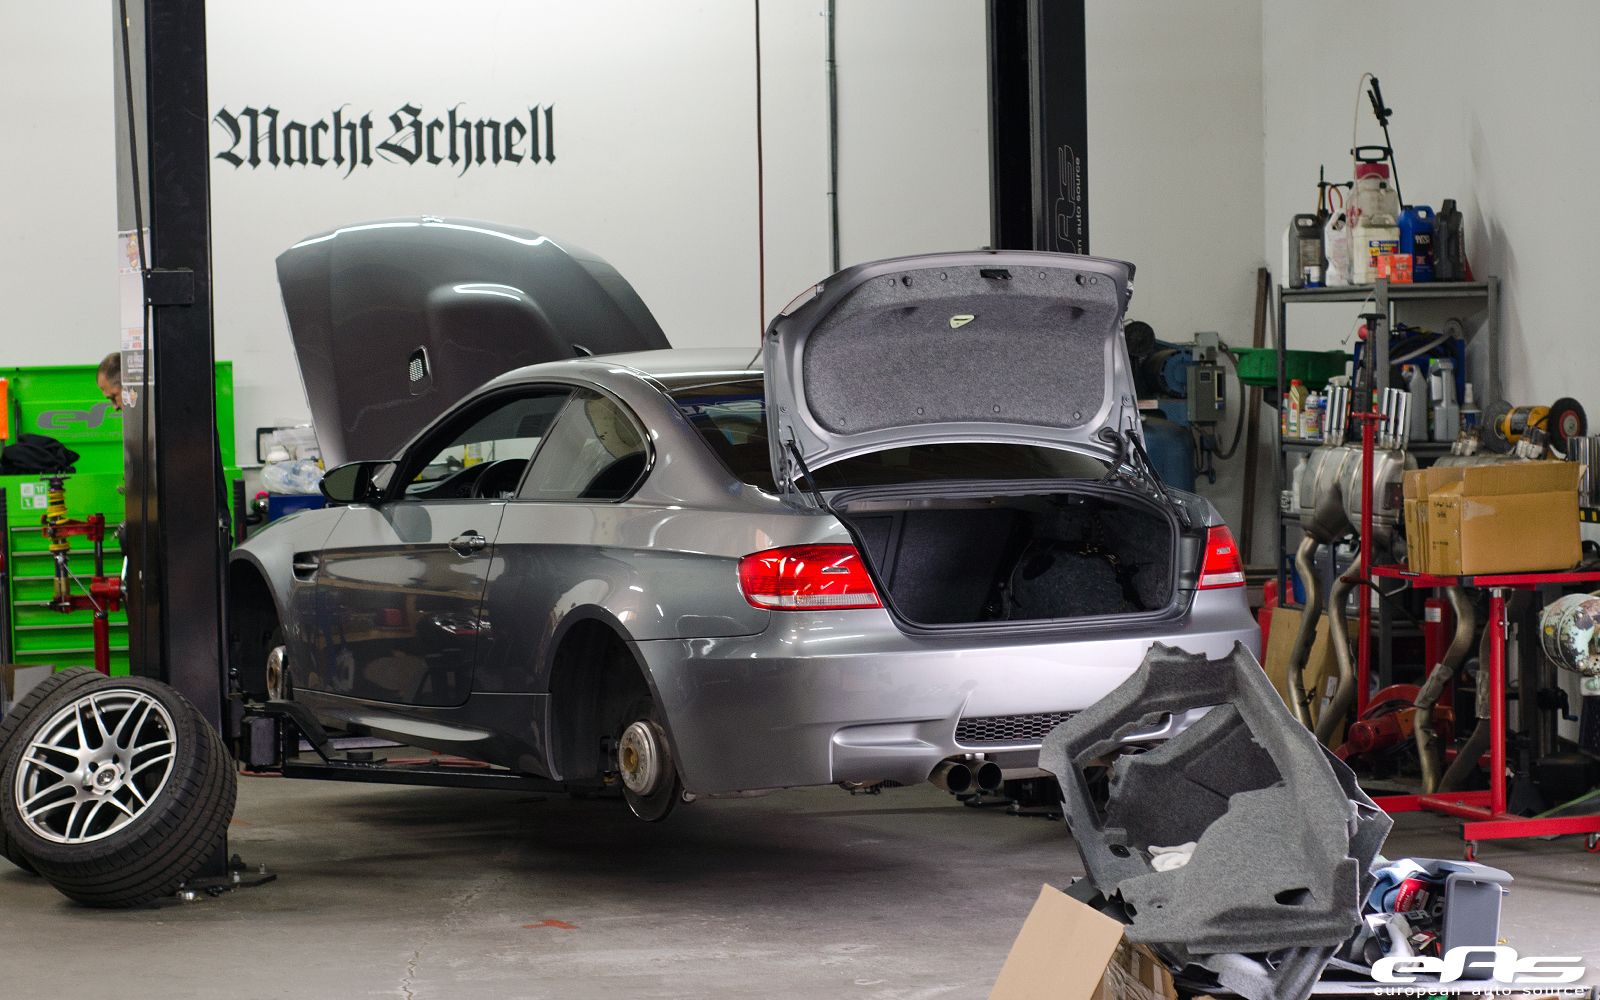 space-grey-bmw-e92-m3-climbs-on-kw-suspension_2-1